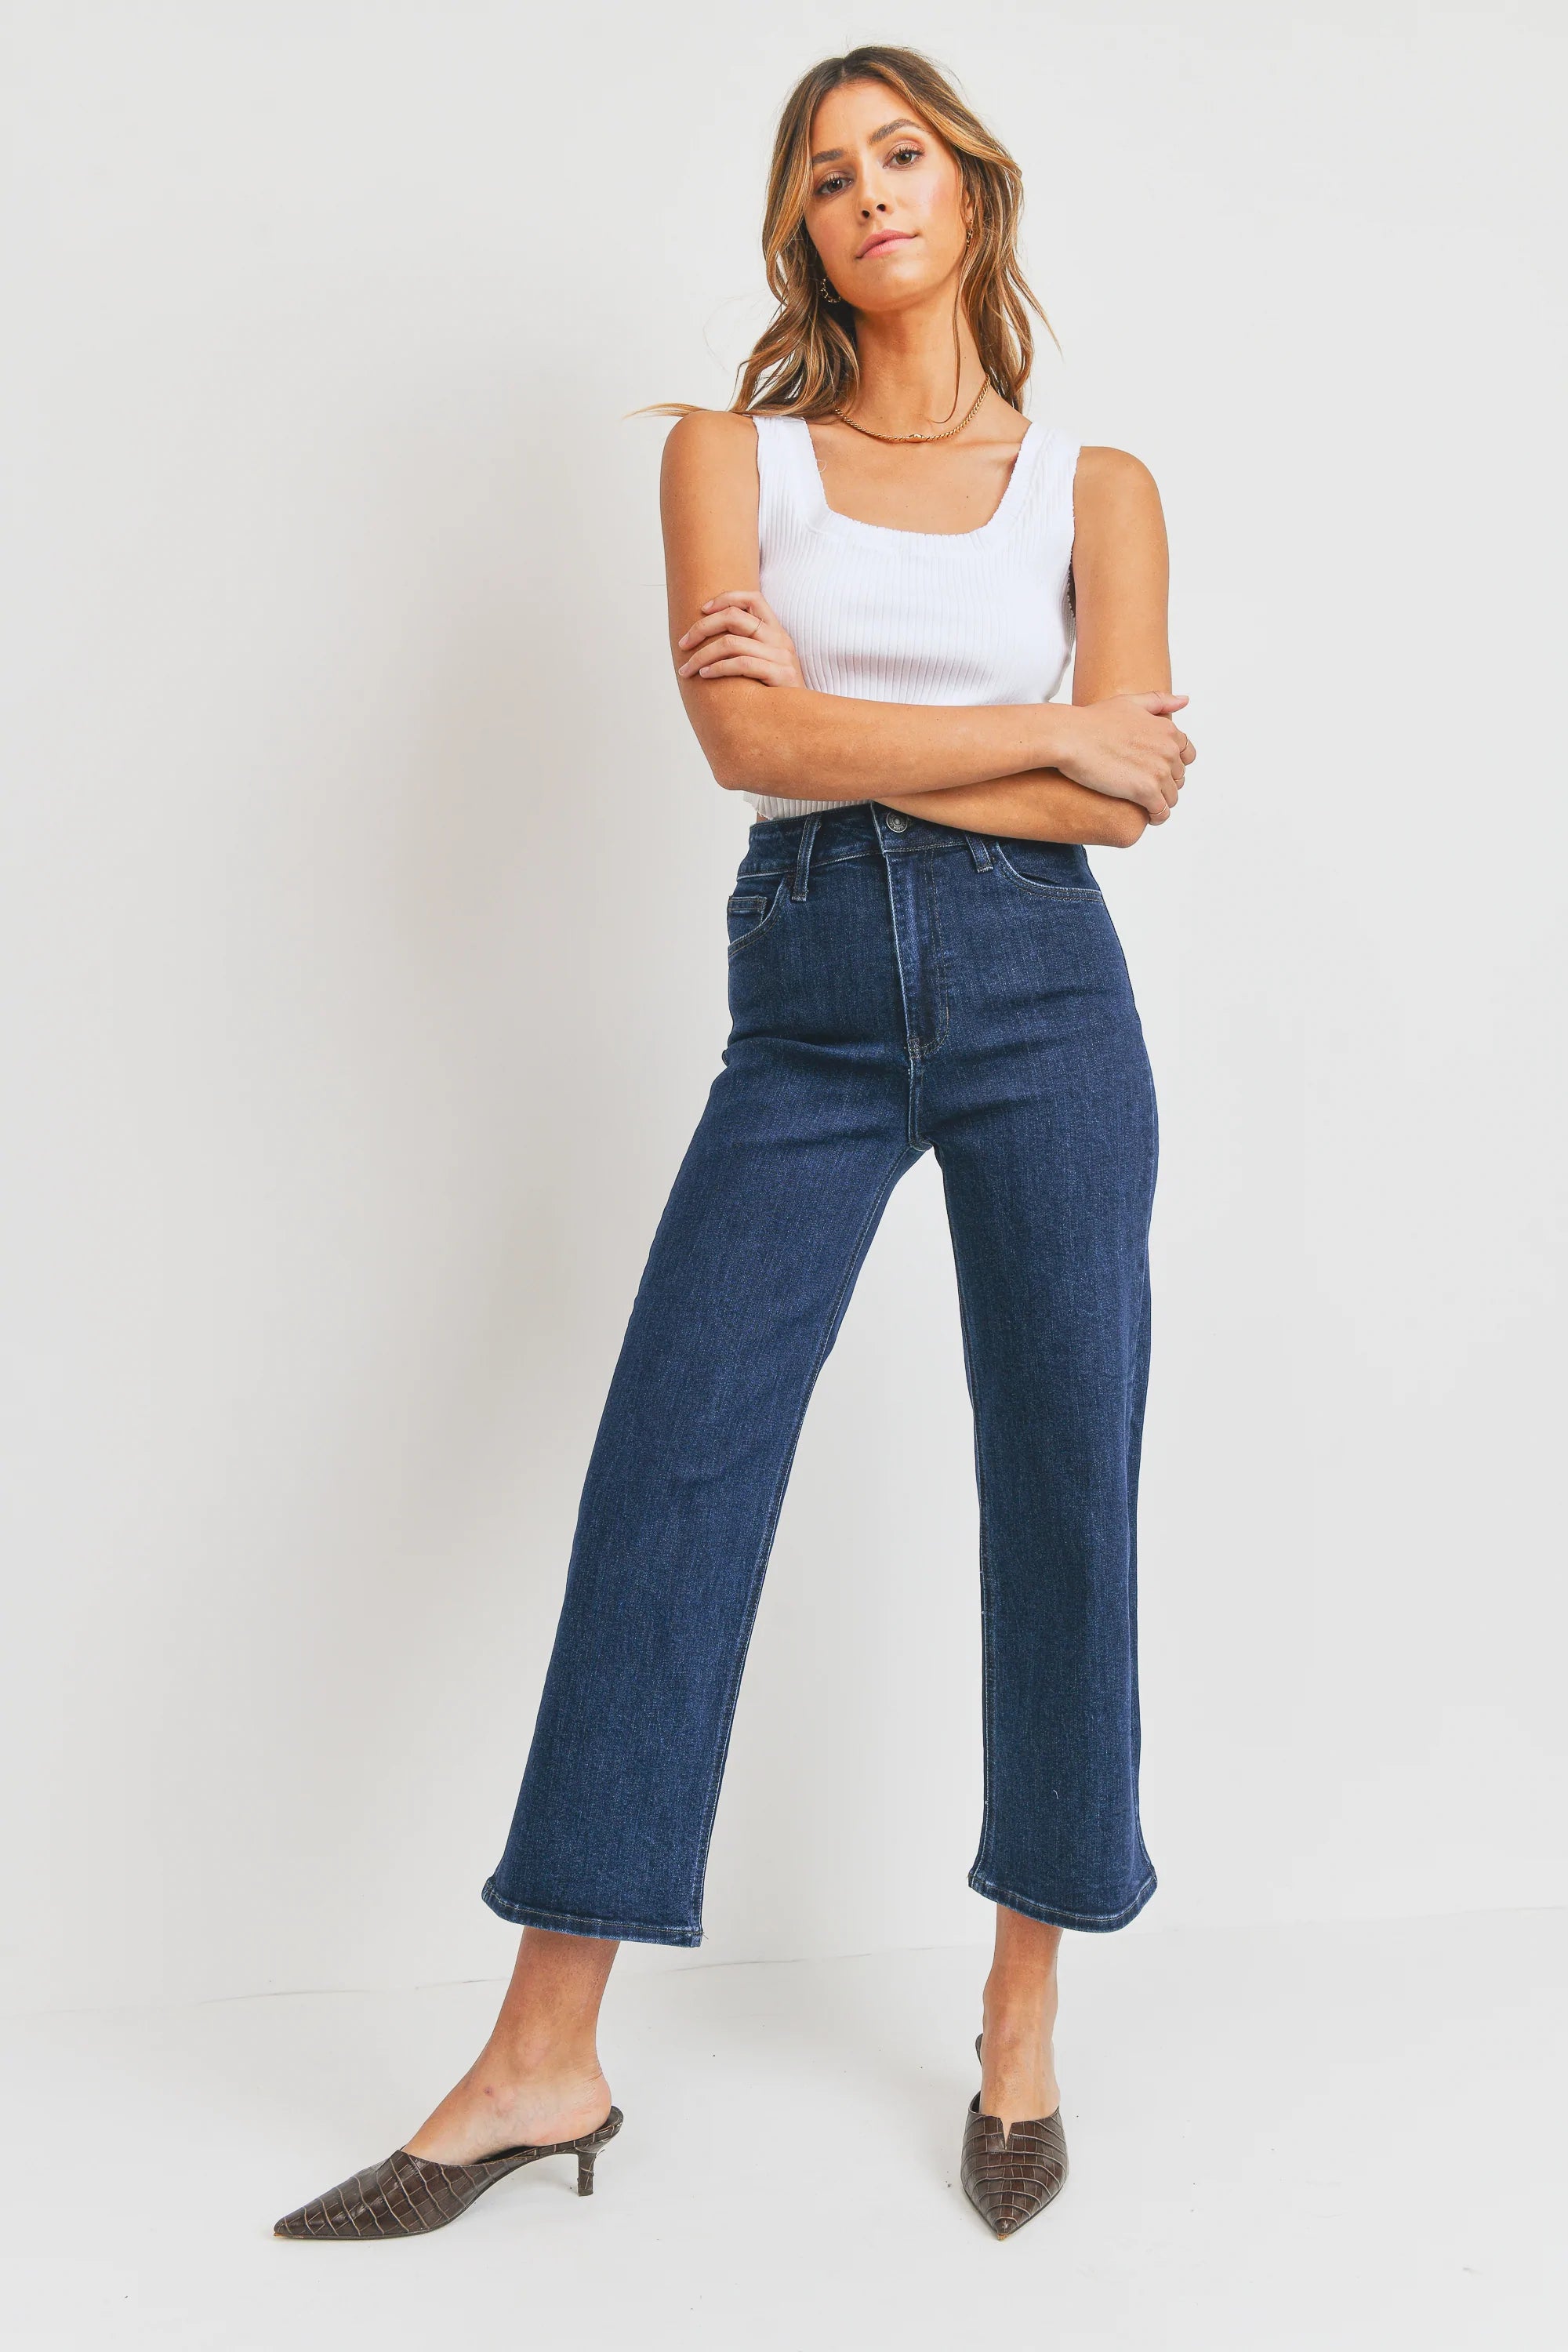 The Jemma Contemporary Wide Leg Jeans by Just Black Denim – Thread + Seed